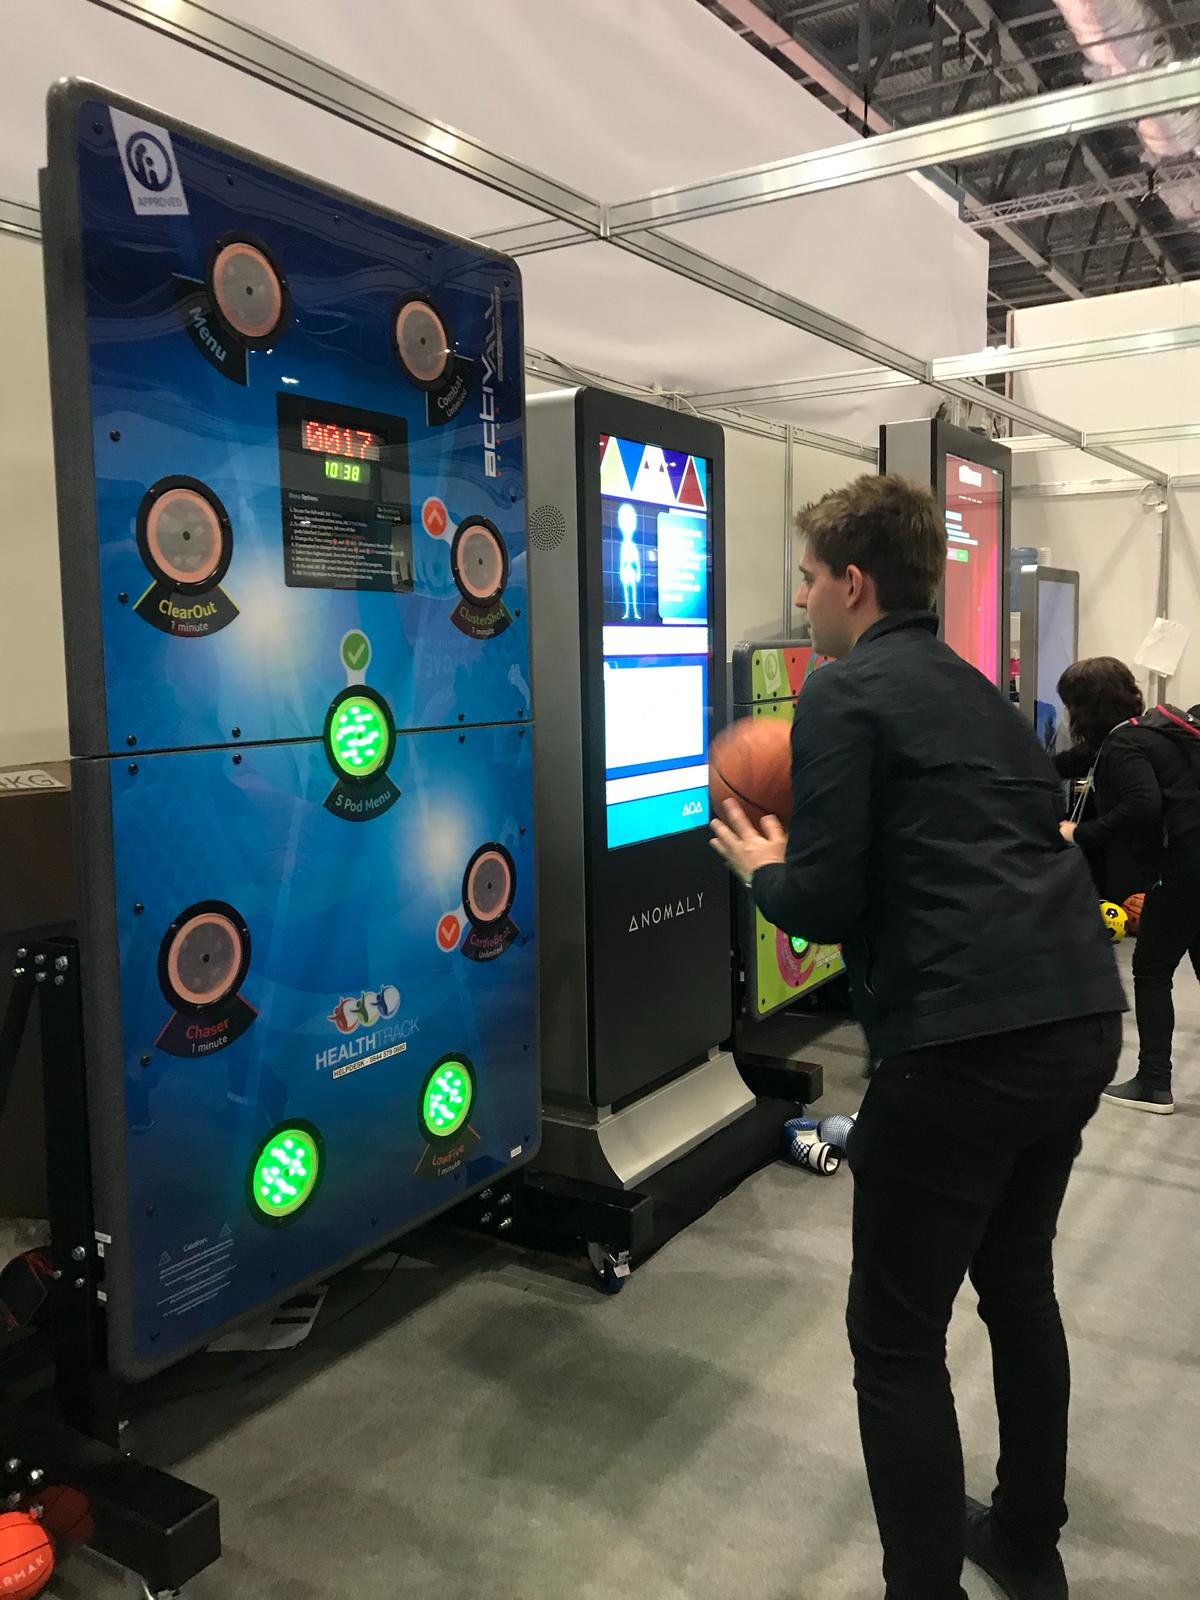 Testing my basketball skills with the interactive board